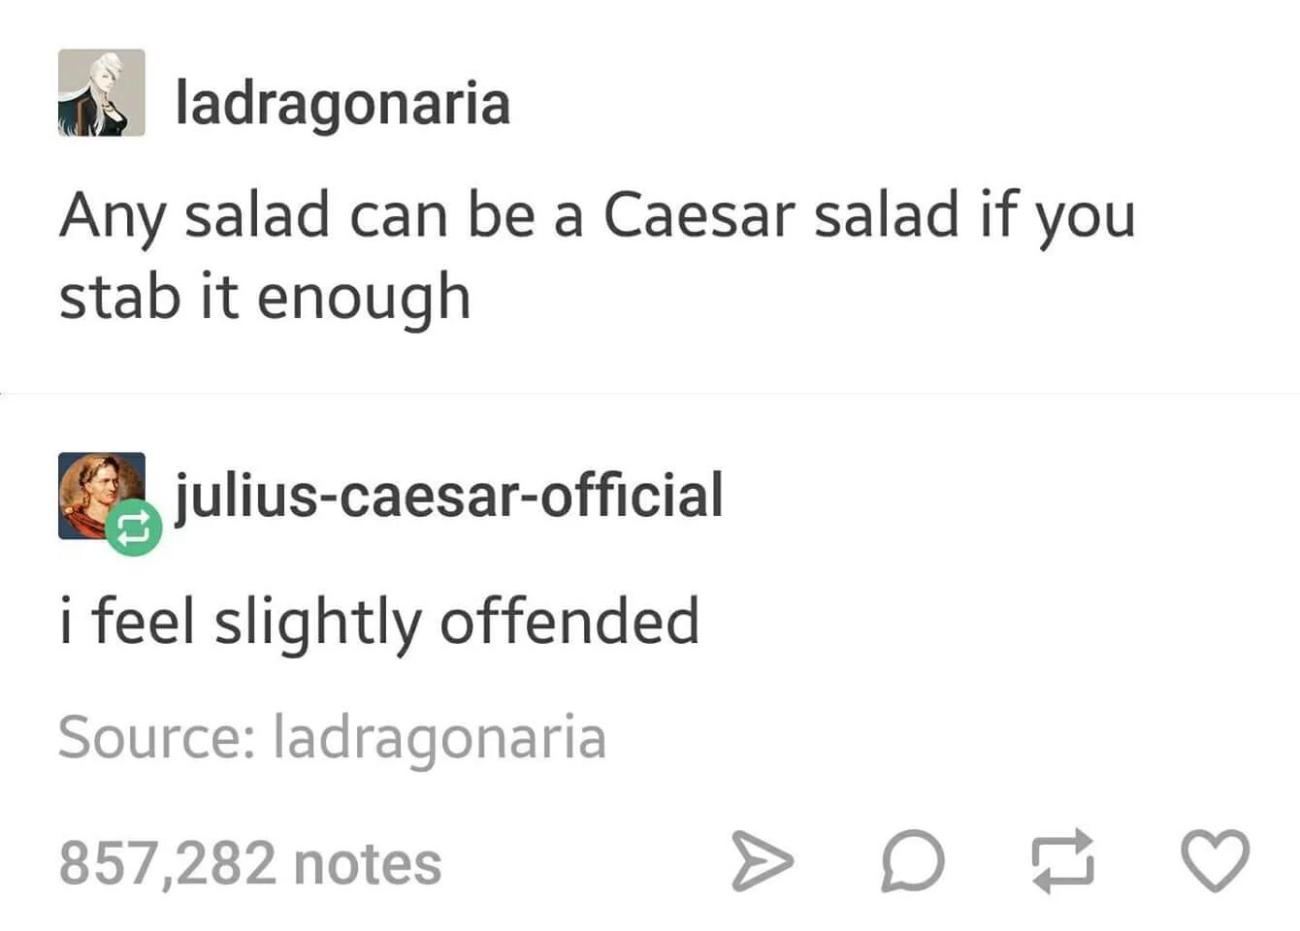 julius caesar memes - his ladragonaria Any salad can be a Caesar salad if you stab it enough 2. juliuscaesarofficial i feel slightly offended Source ladragonaria 857,282 notes > D E